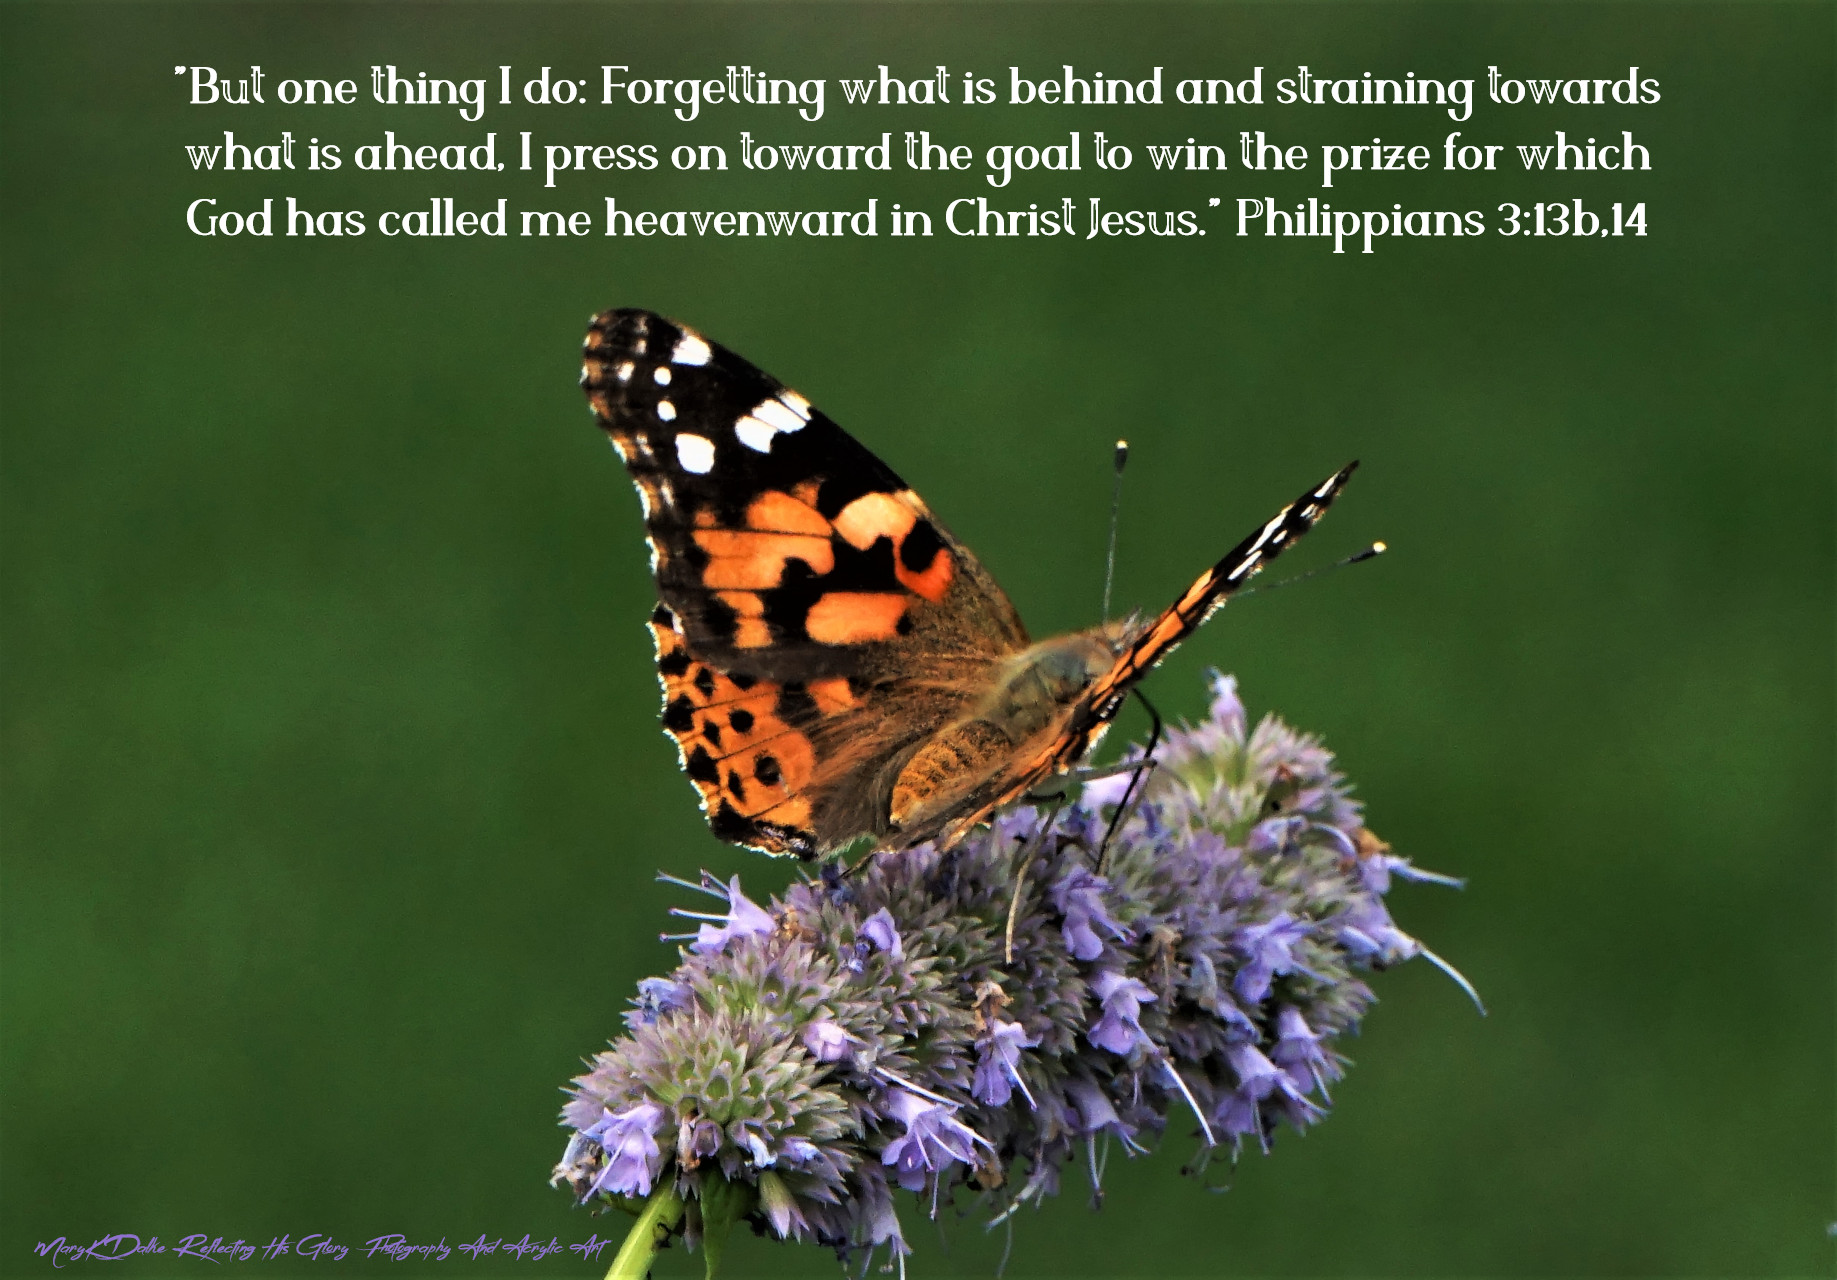 Painted Lady Butterfly on Lavender Flowering Branch Ready to Fly Forward - Philippians 3 13b.14 - Mary K Dalke Reflecting His Glory Photography And Acrylic Art DSC08695